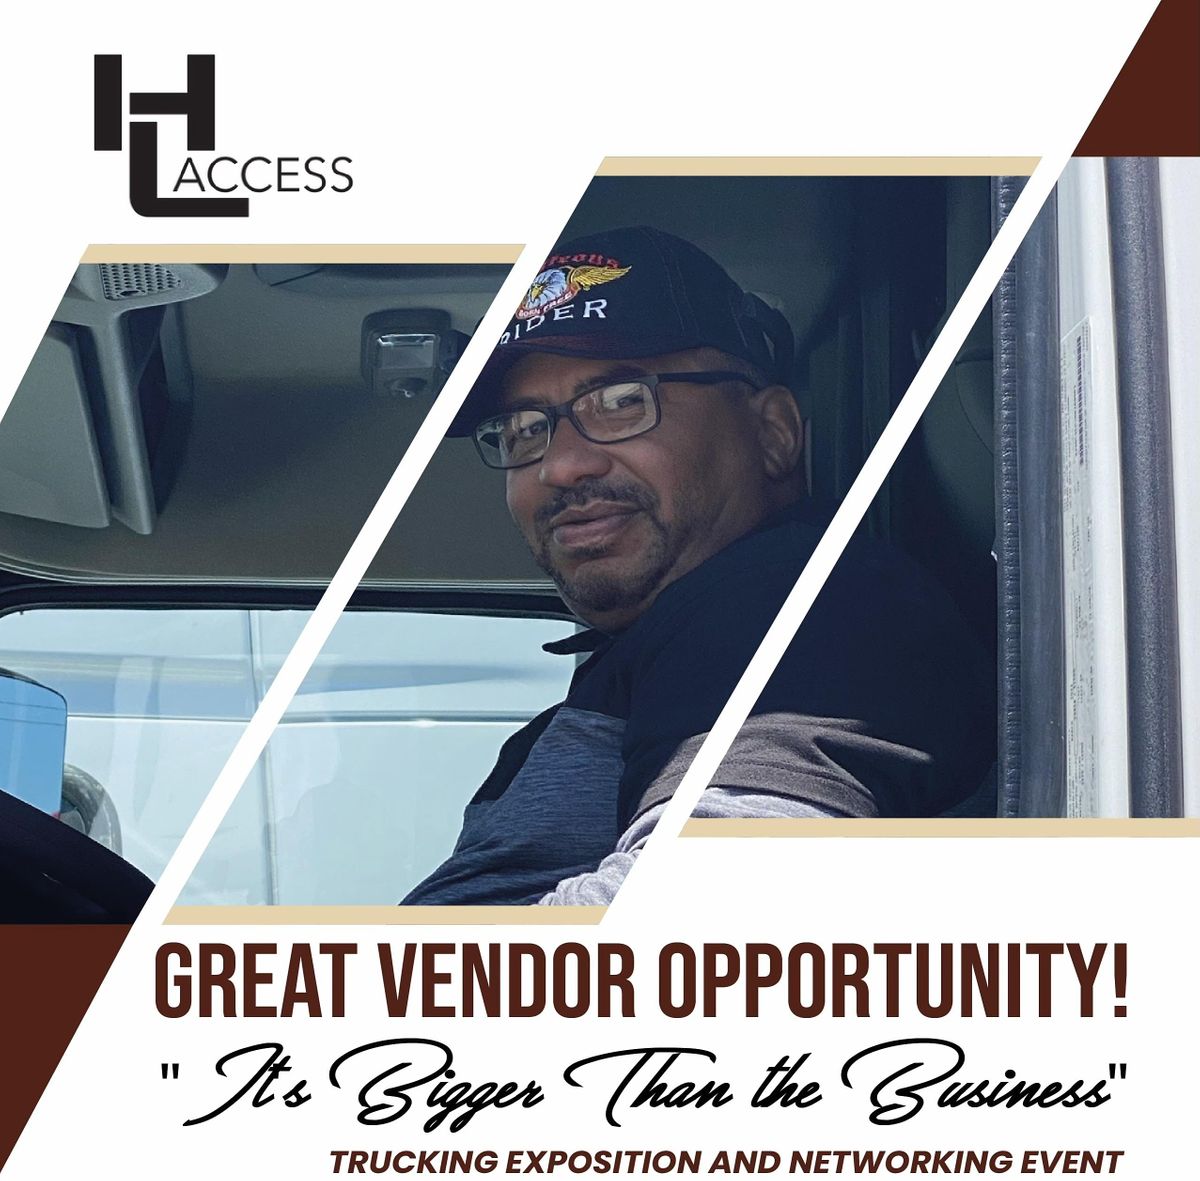 HL ACCESS "It's Bigger than A Business" Trucking Exposion - Vendor